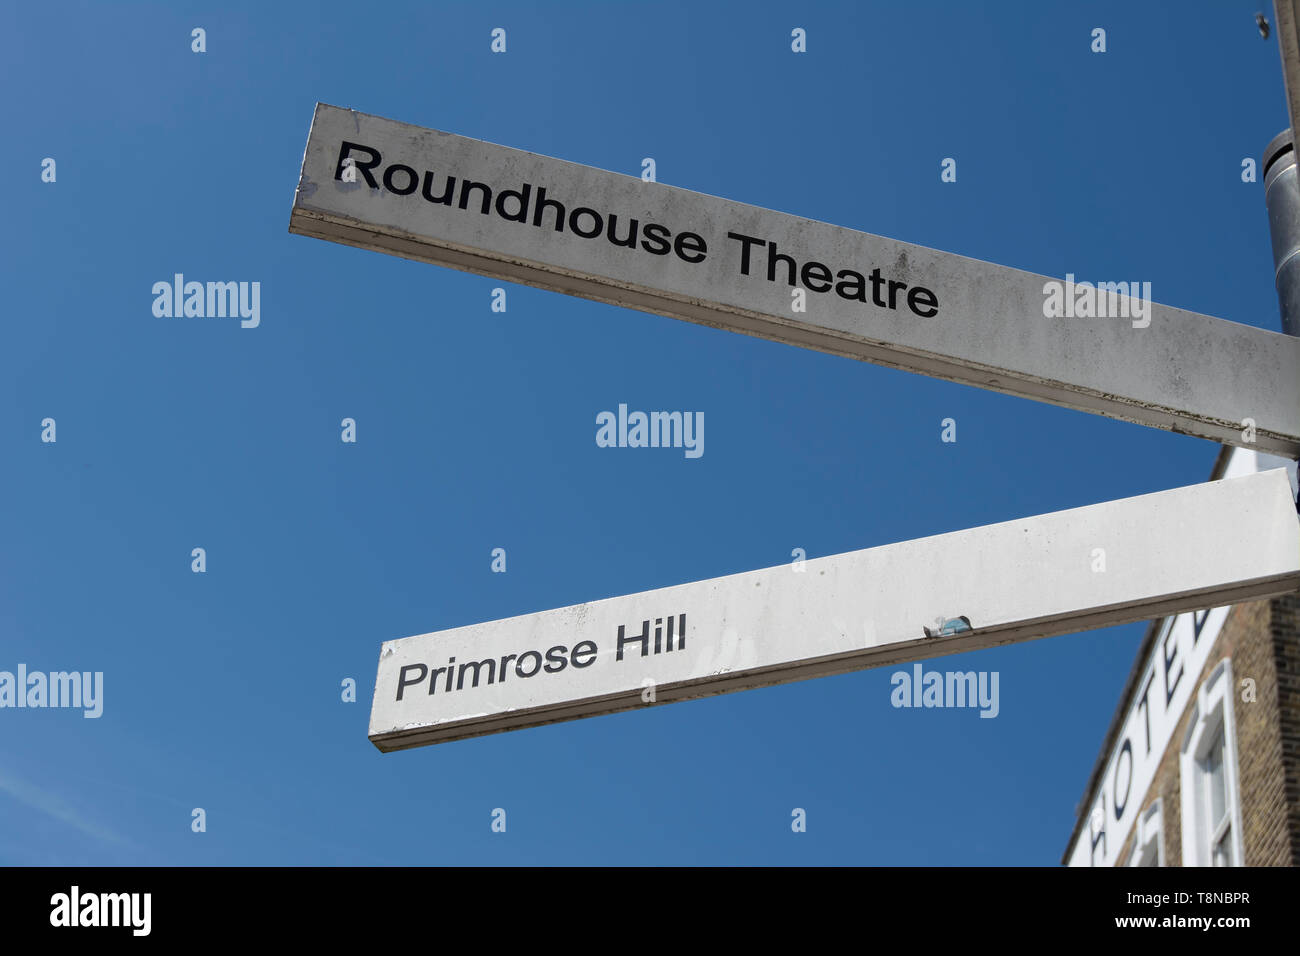 left pointing direction signs for primrose hill and the roundhouse theatre, in camden, london, england Stock Photo